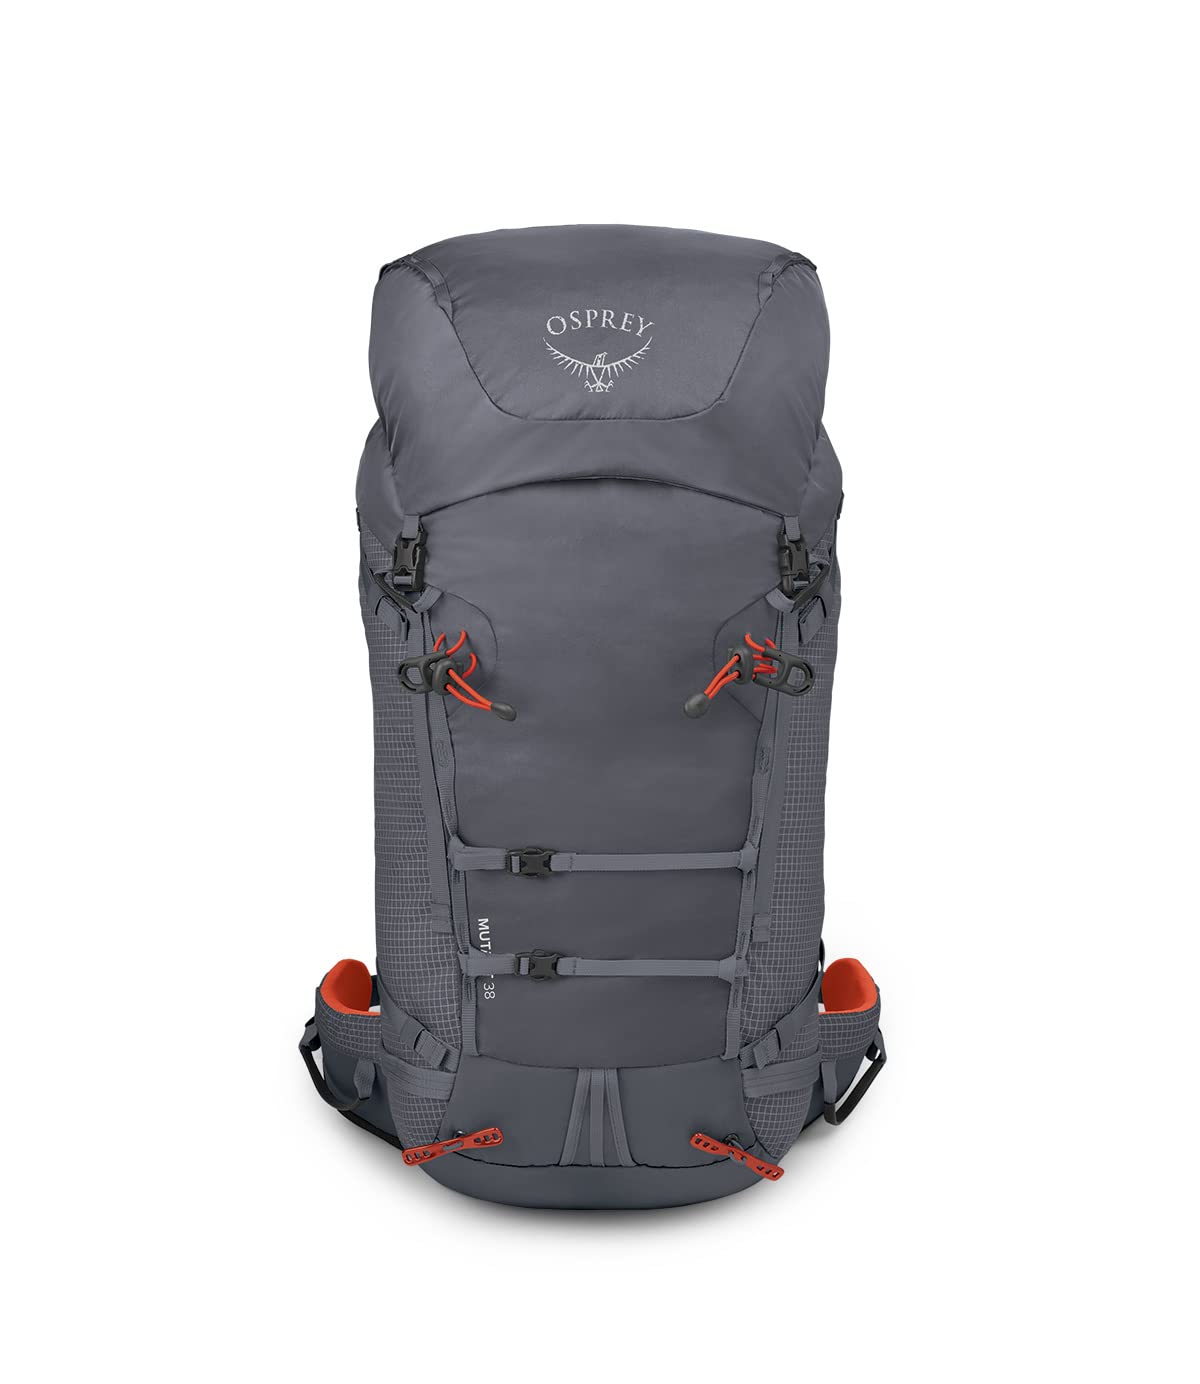 Osprey Mutant 38 Climbing and Mountaineering Backpack, Tungsten Grey, Medium/Large